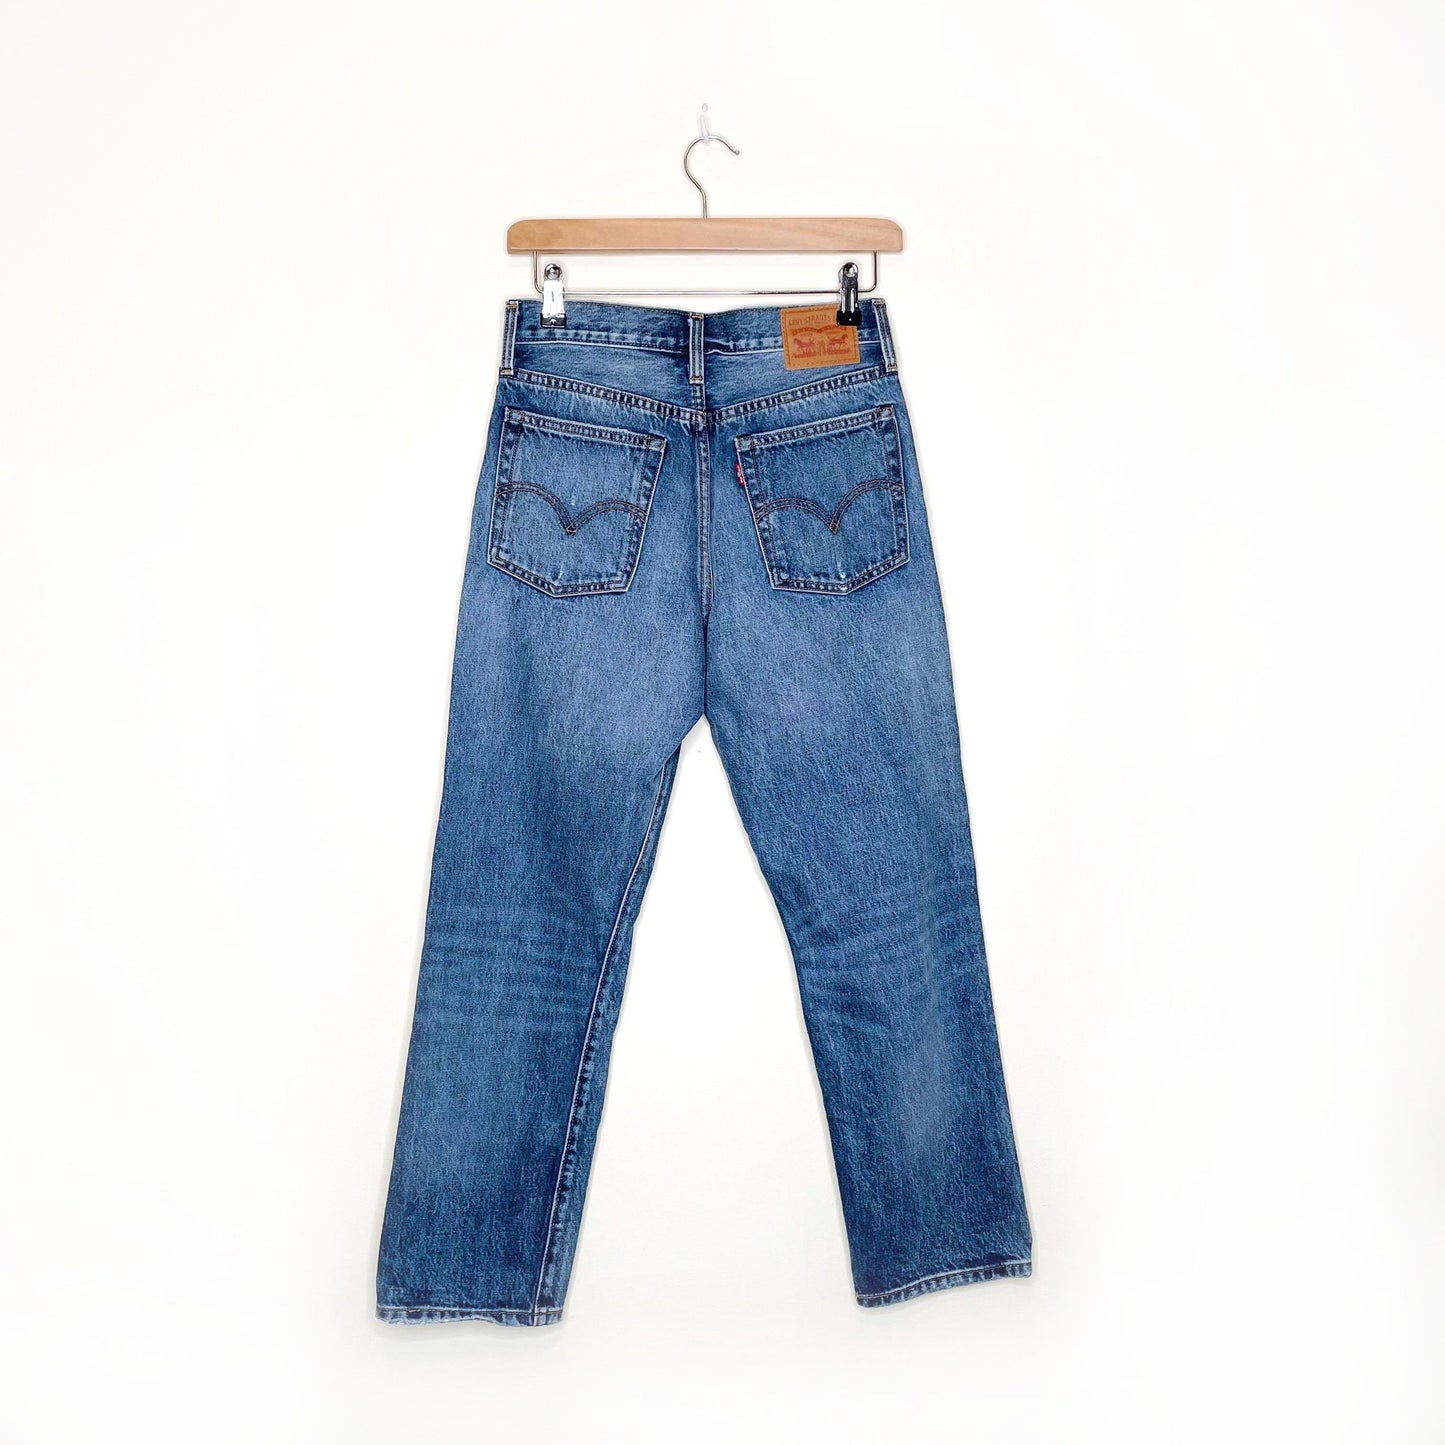 levi's wedgie straight leg button fly jeans - size 26